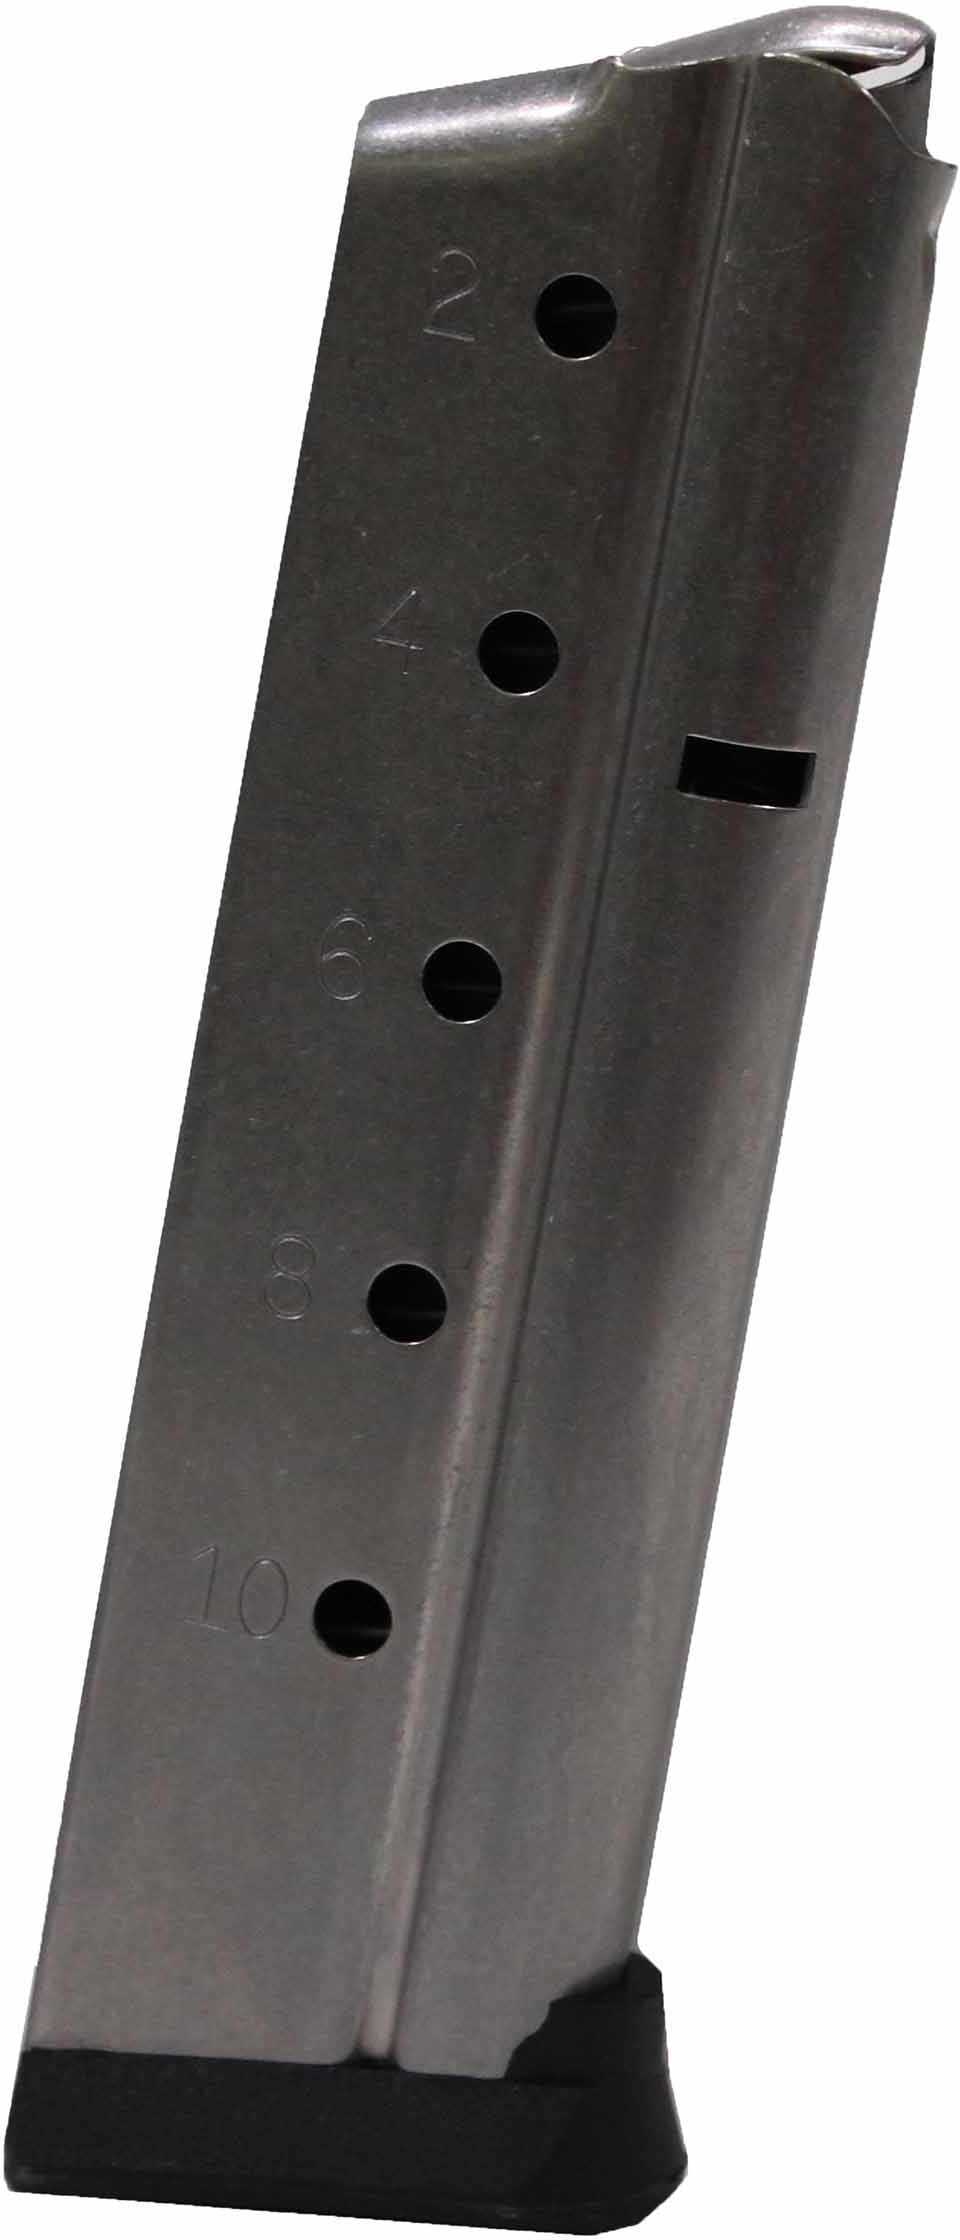 Rock Island Armory RIA-Mag Full Size 1911 Single Stack Magazine For 22TCM/9mm 10/Rd